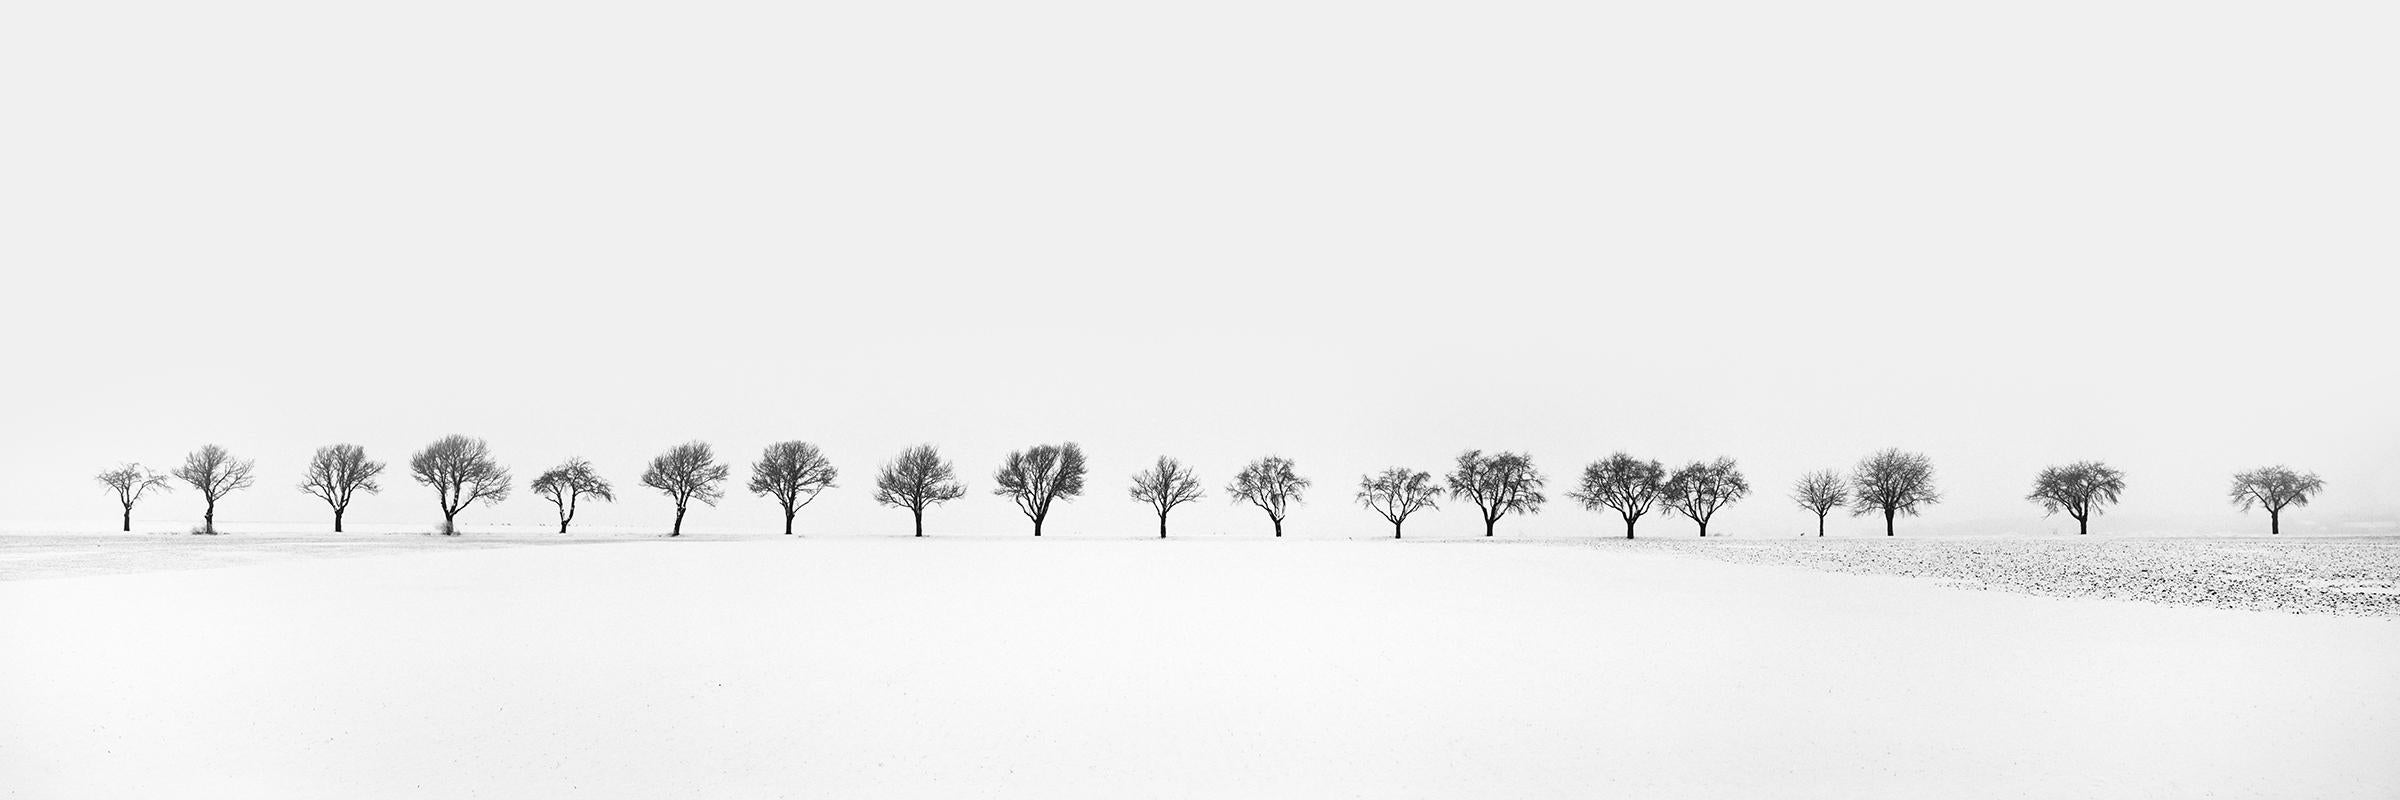 Cherry Trees in snow Field, Tree Avenue, black and white photography, landscape